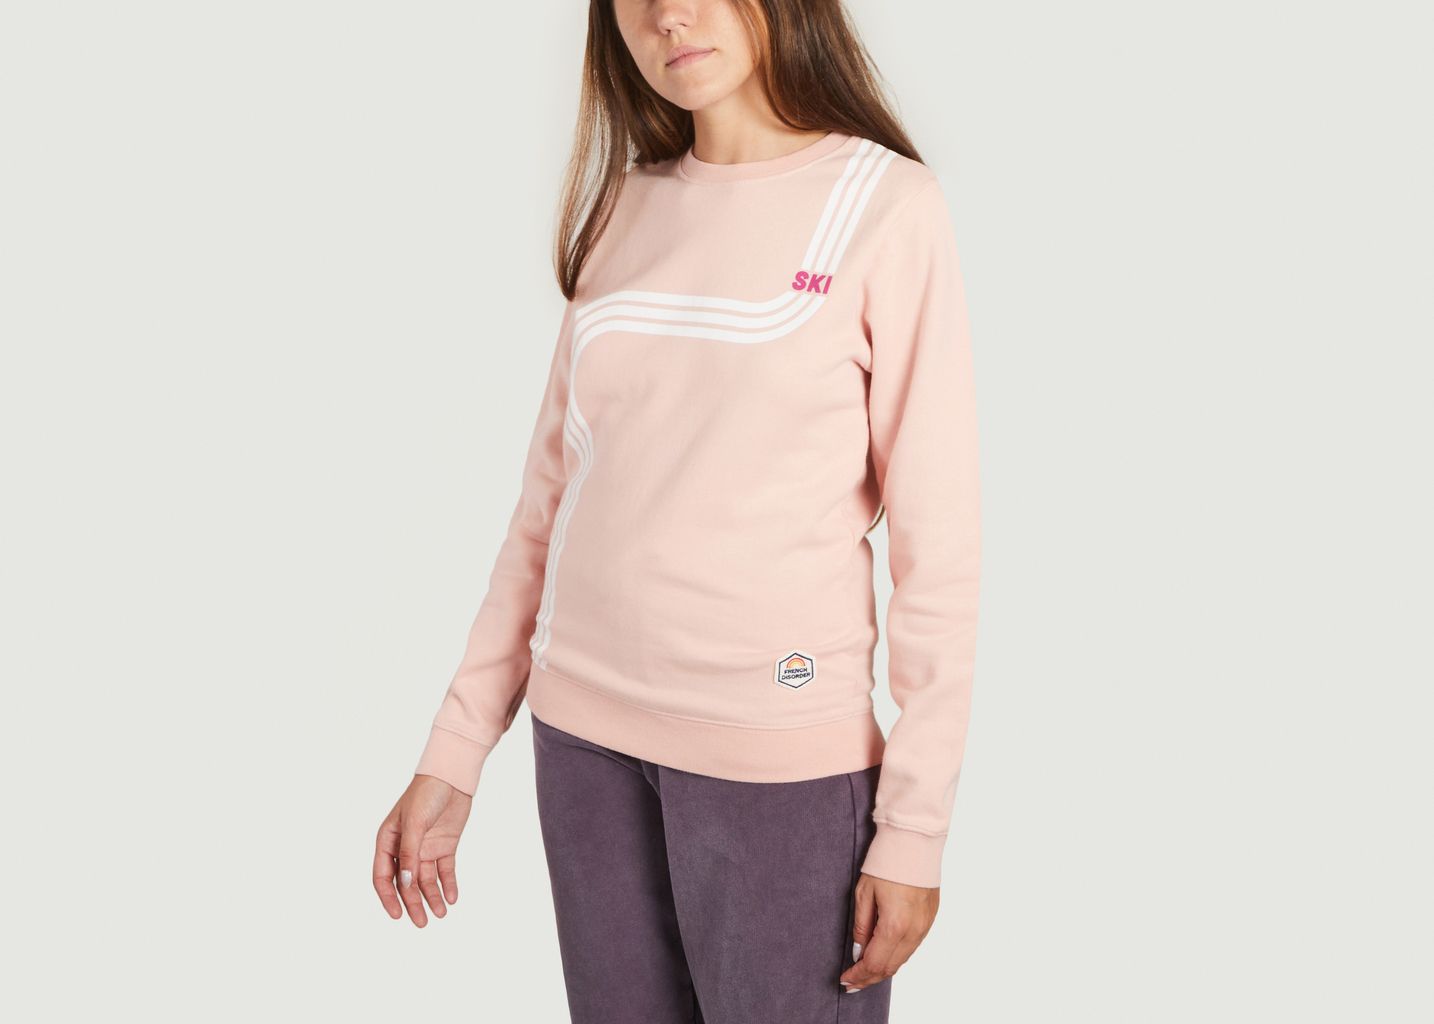 Sky Lines Dylan Sweater - French Disorder